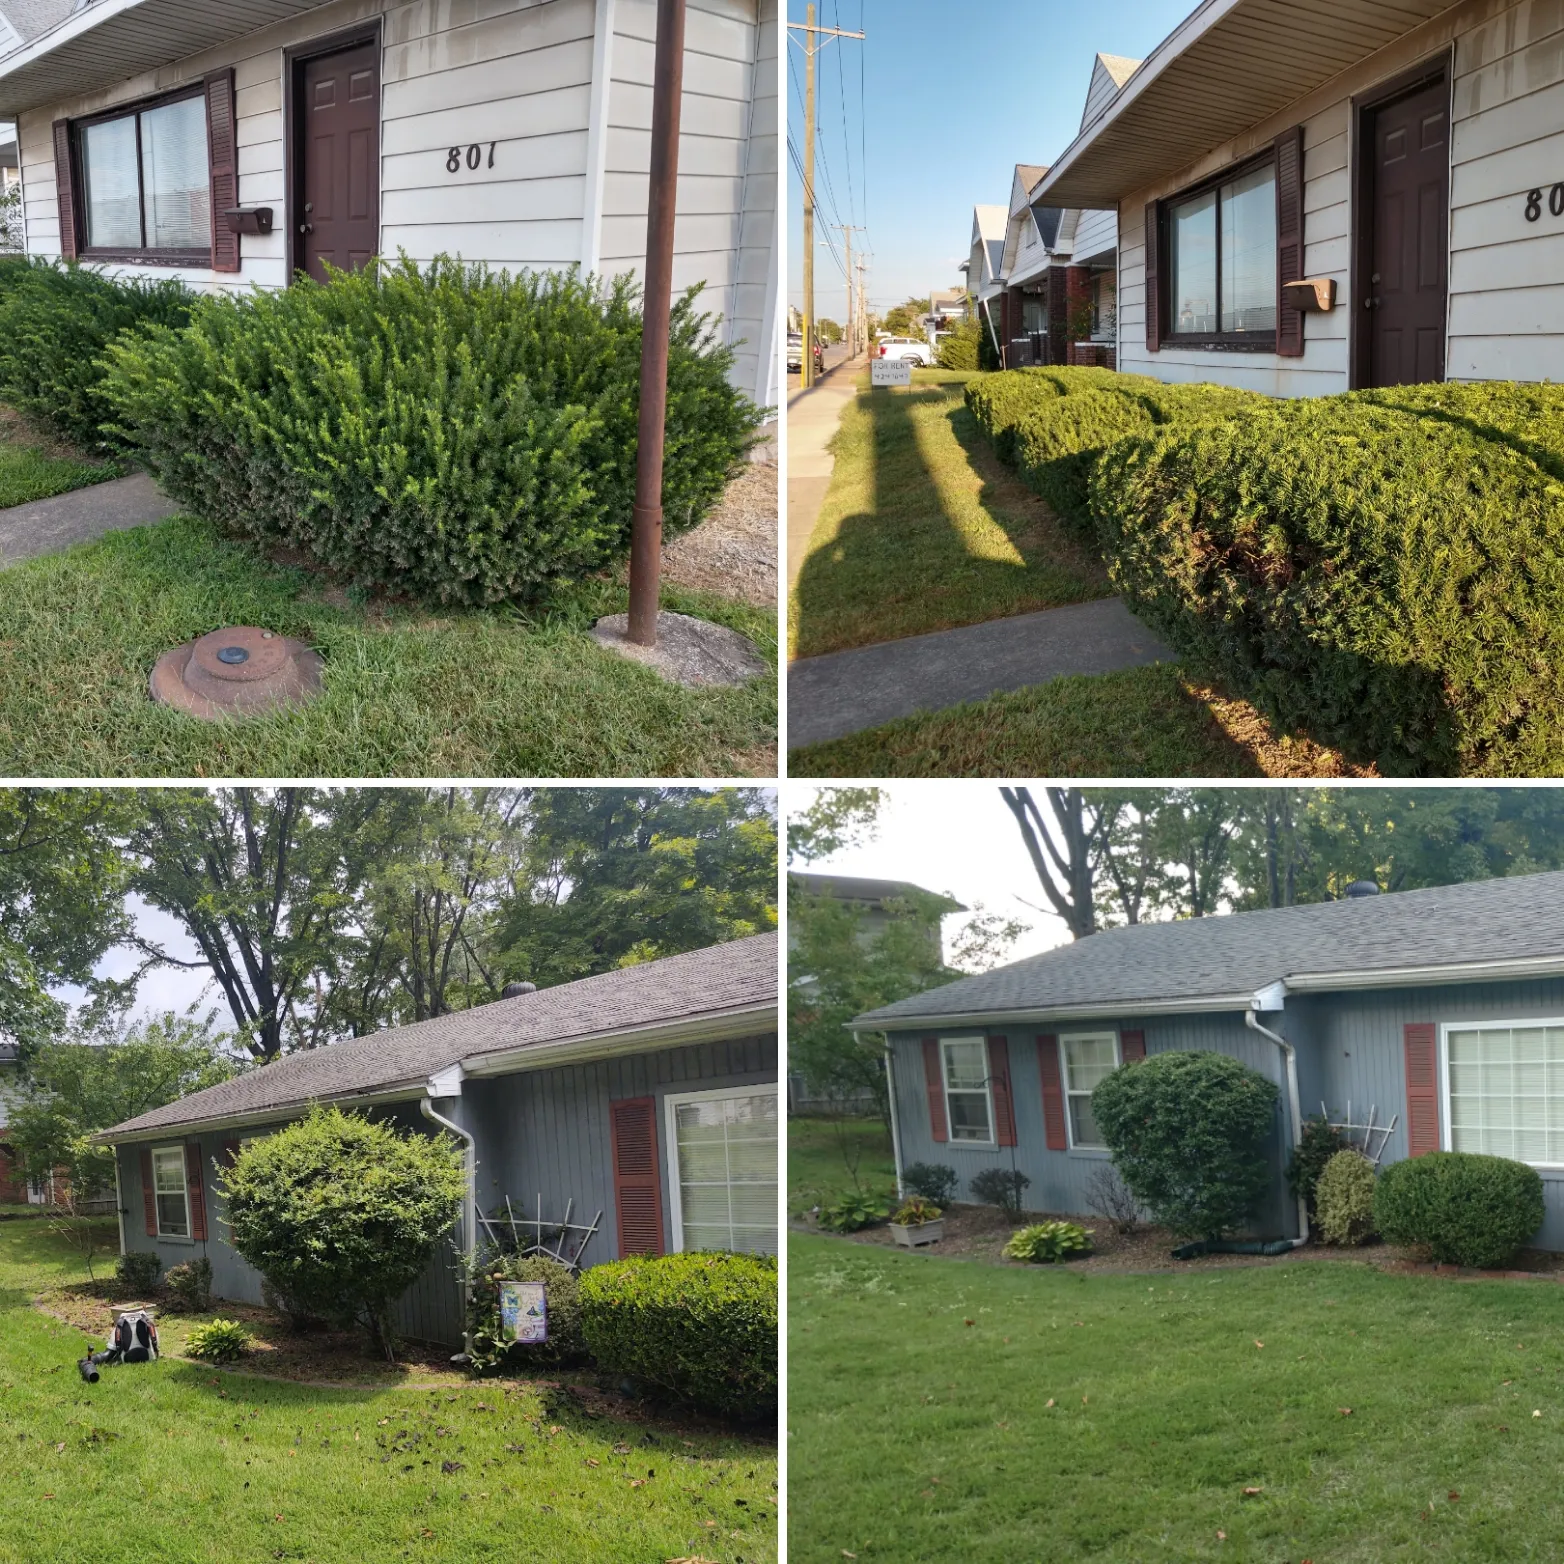 Landscape Maintenance for The Grass Guys Complete Lawn Care LLC. in Evansville, IN